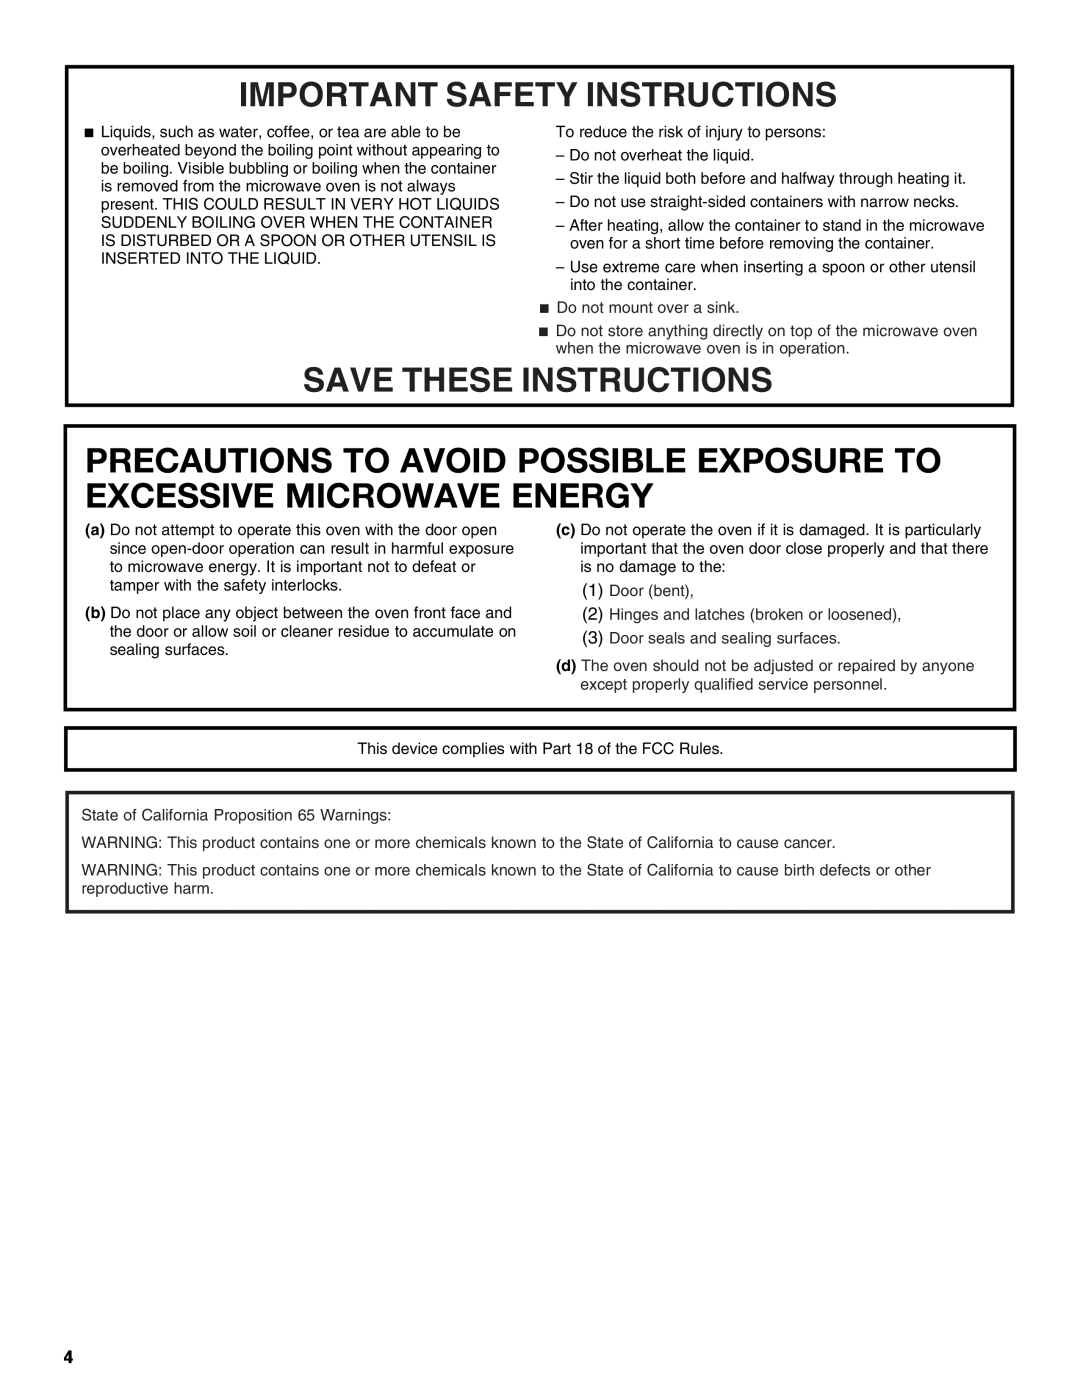 KitchenAid KCMS2255 Precautions To Avoid Possible Exposure To Excessive Microwave Energy, Important Safety Instructions 